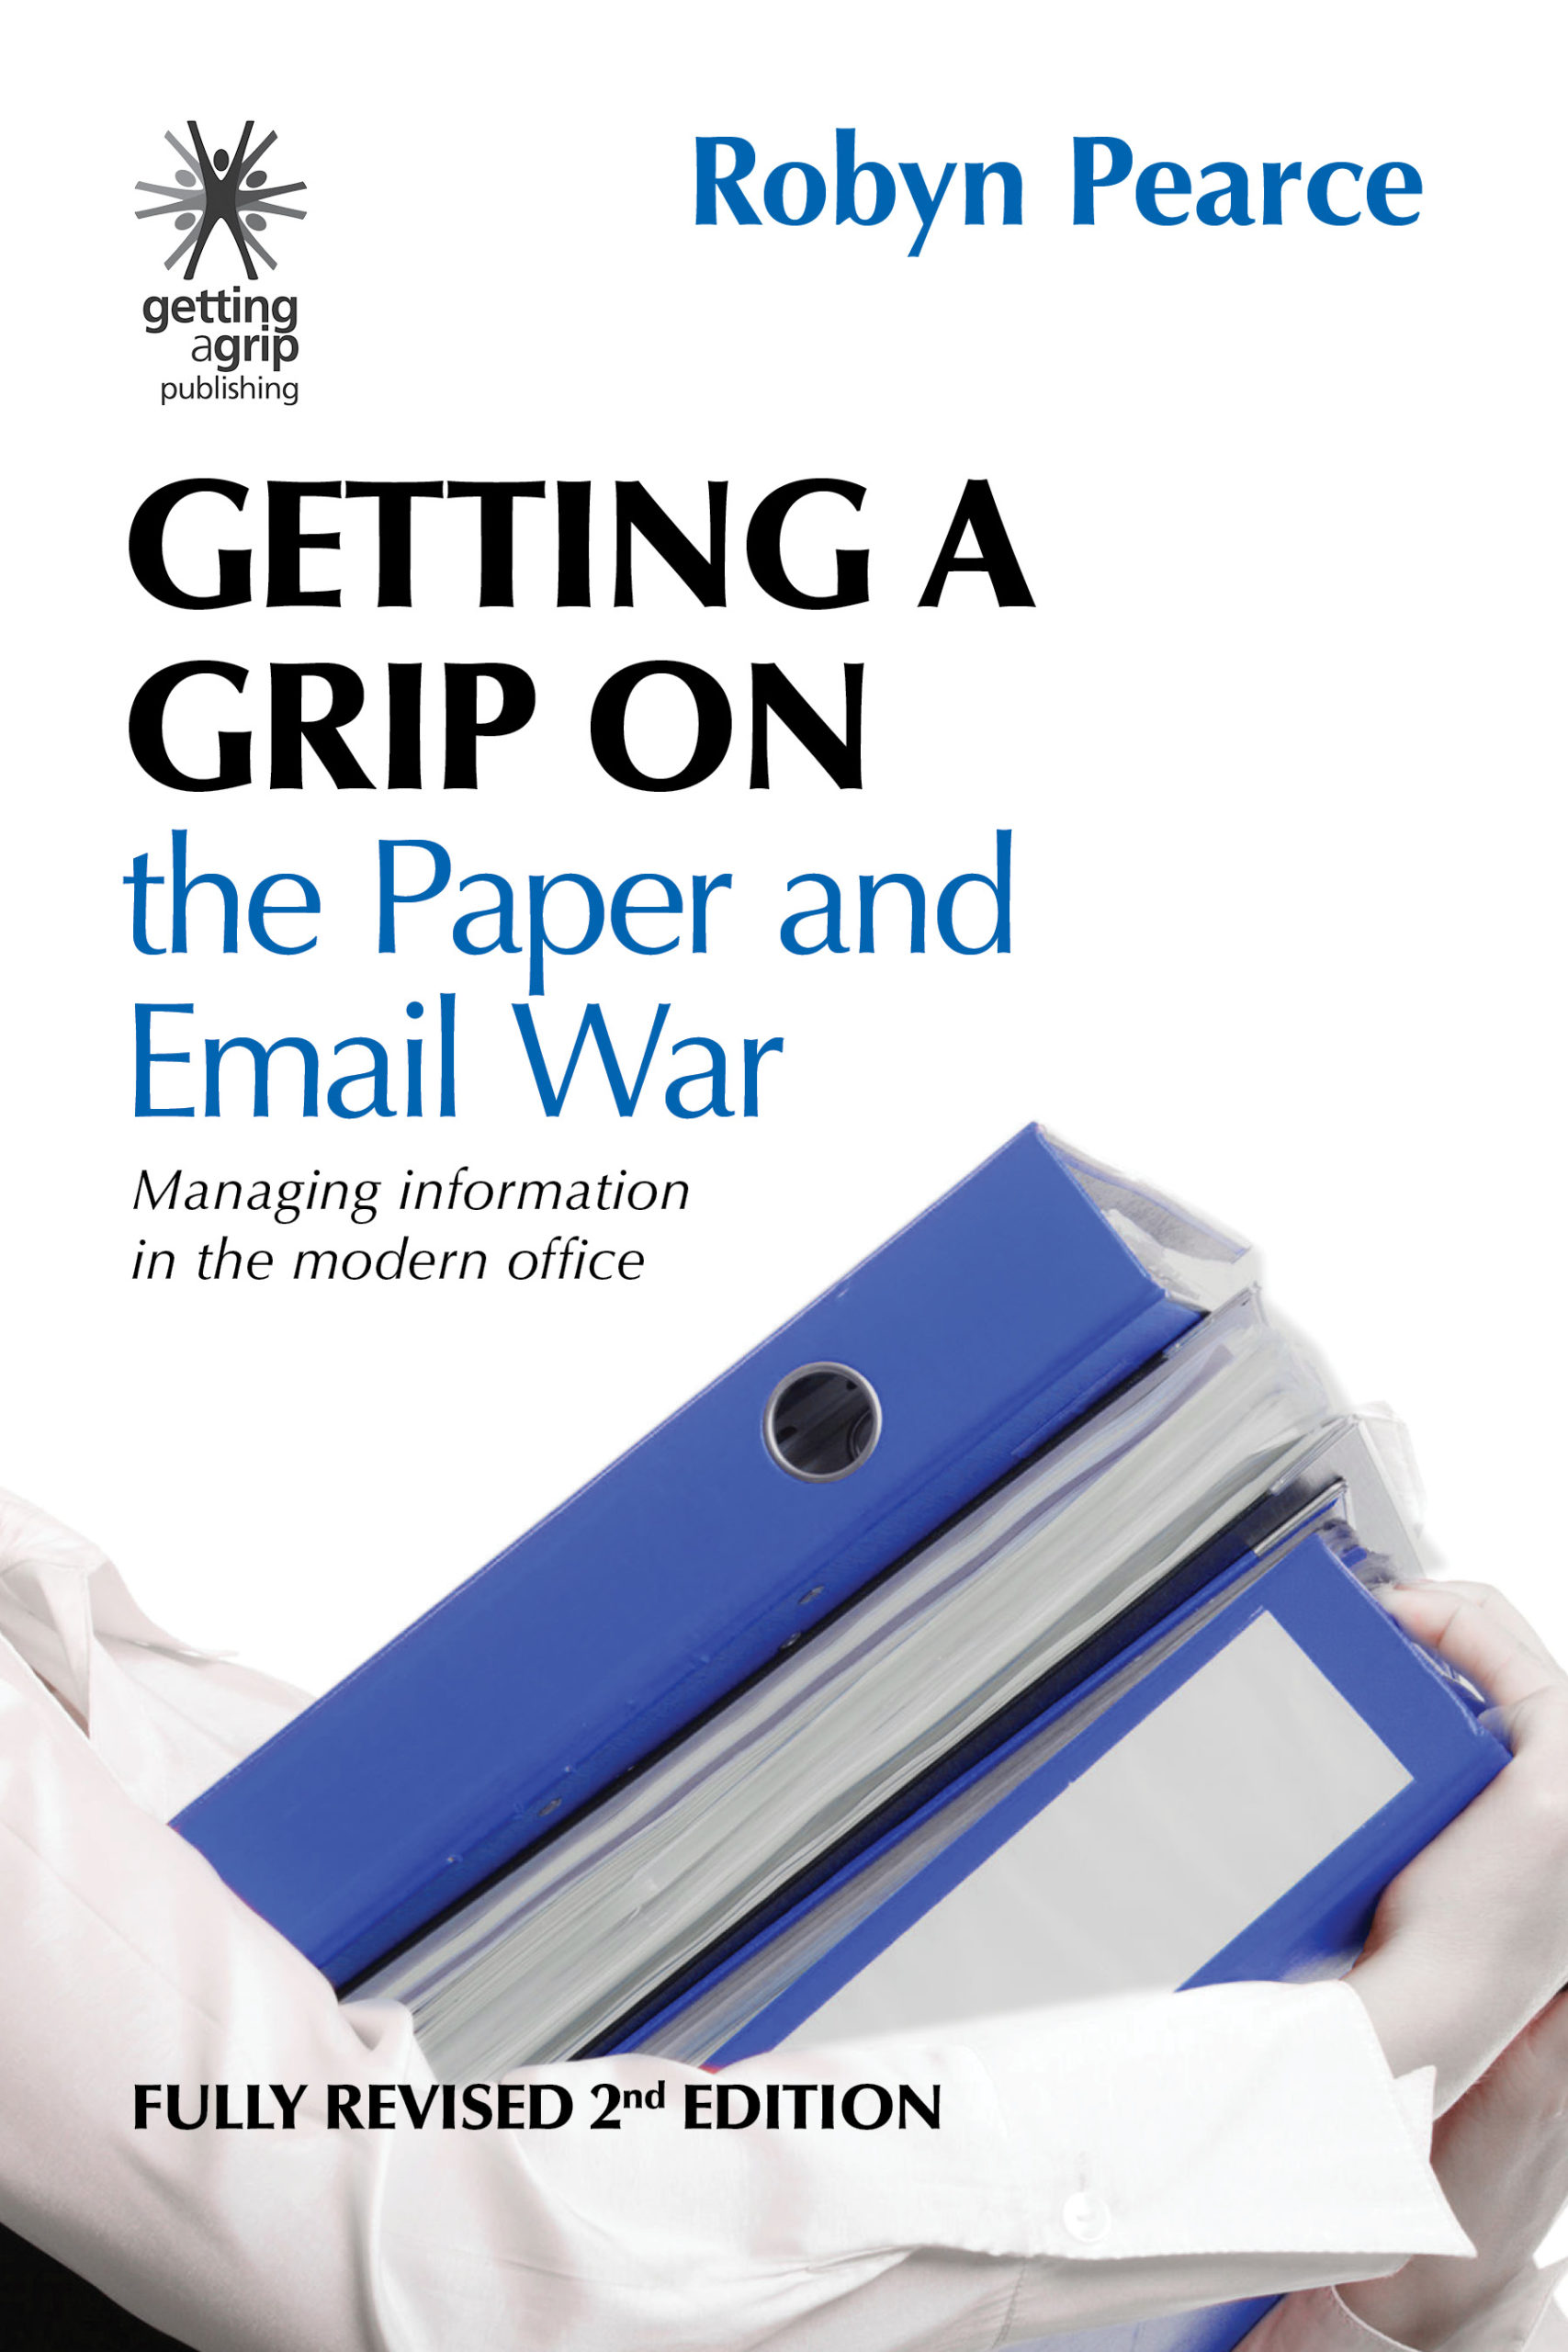 Getting A Grip on the Paper & Email War – Managing information in the modern office